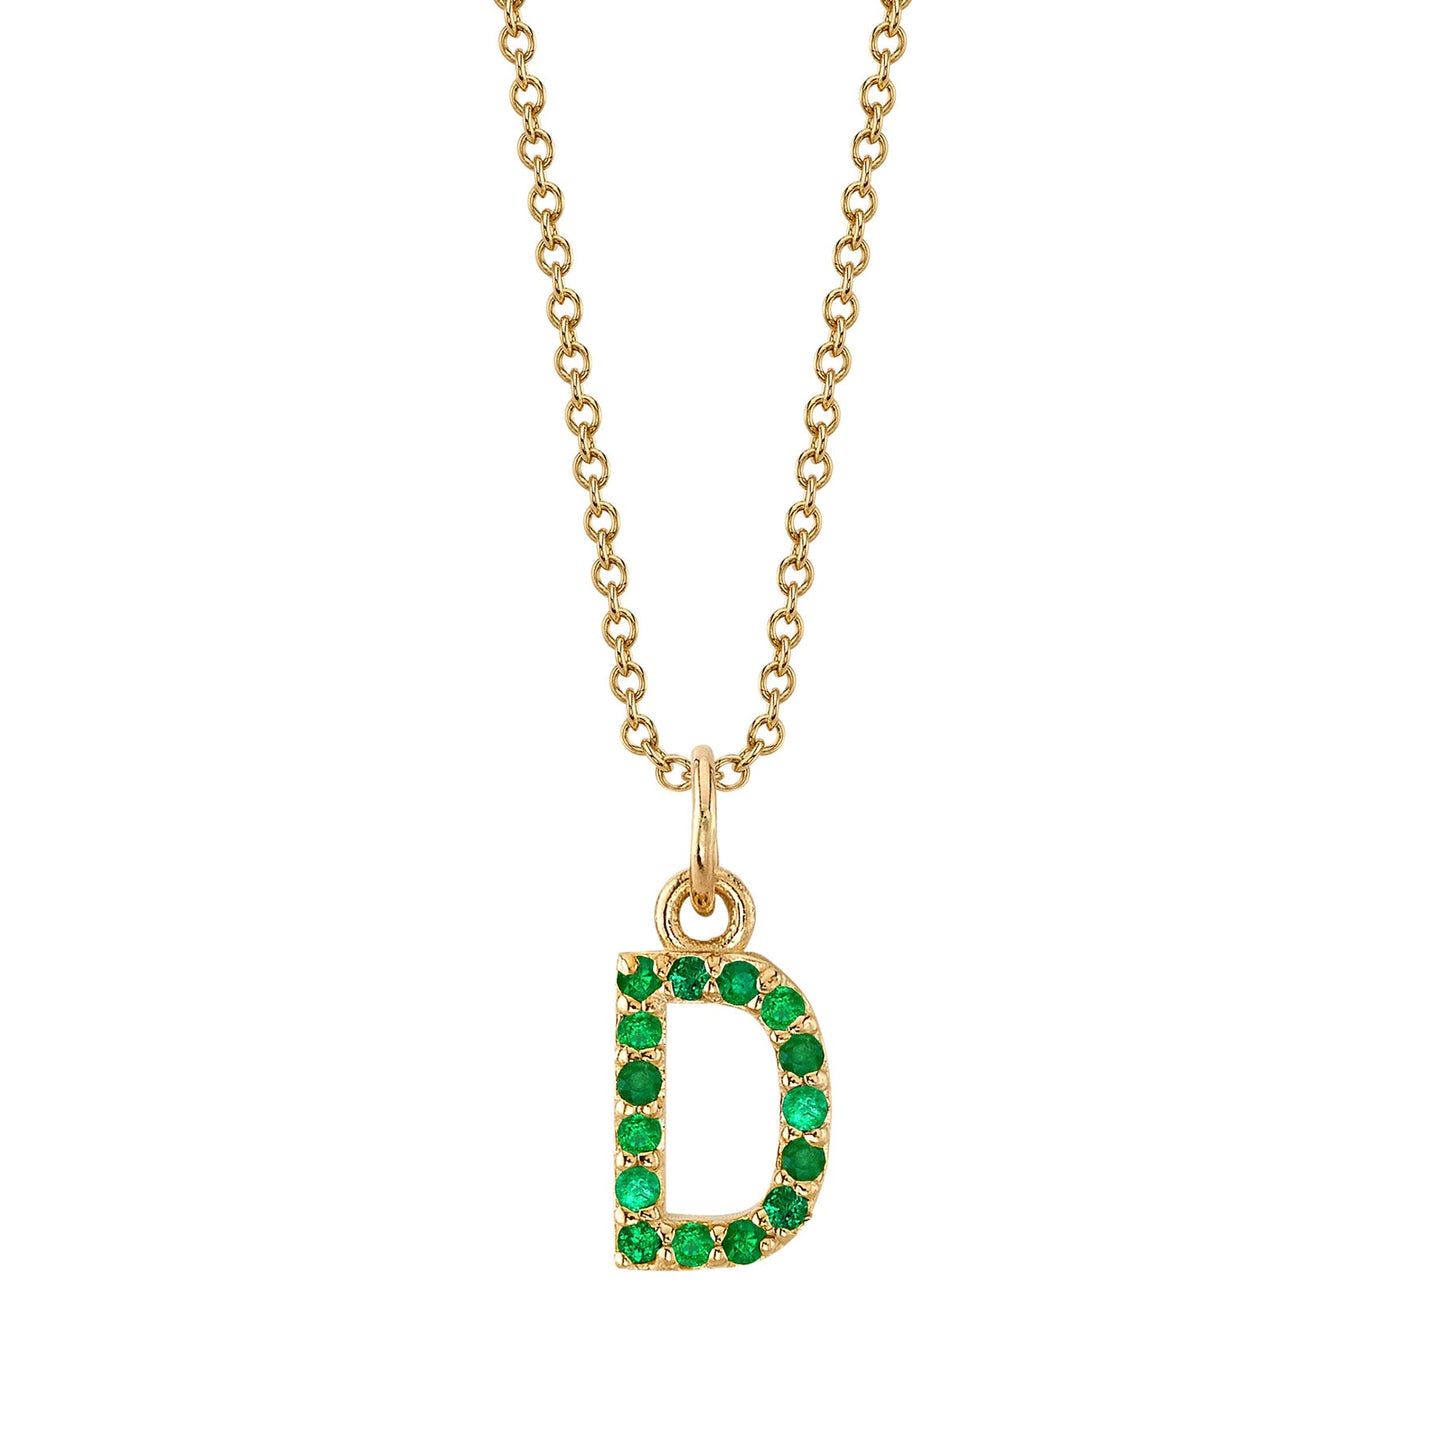 D Initial Birthstone Charm Necklace